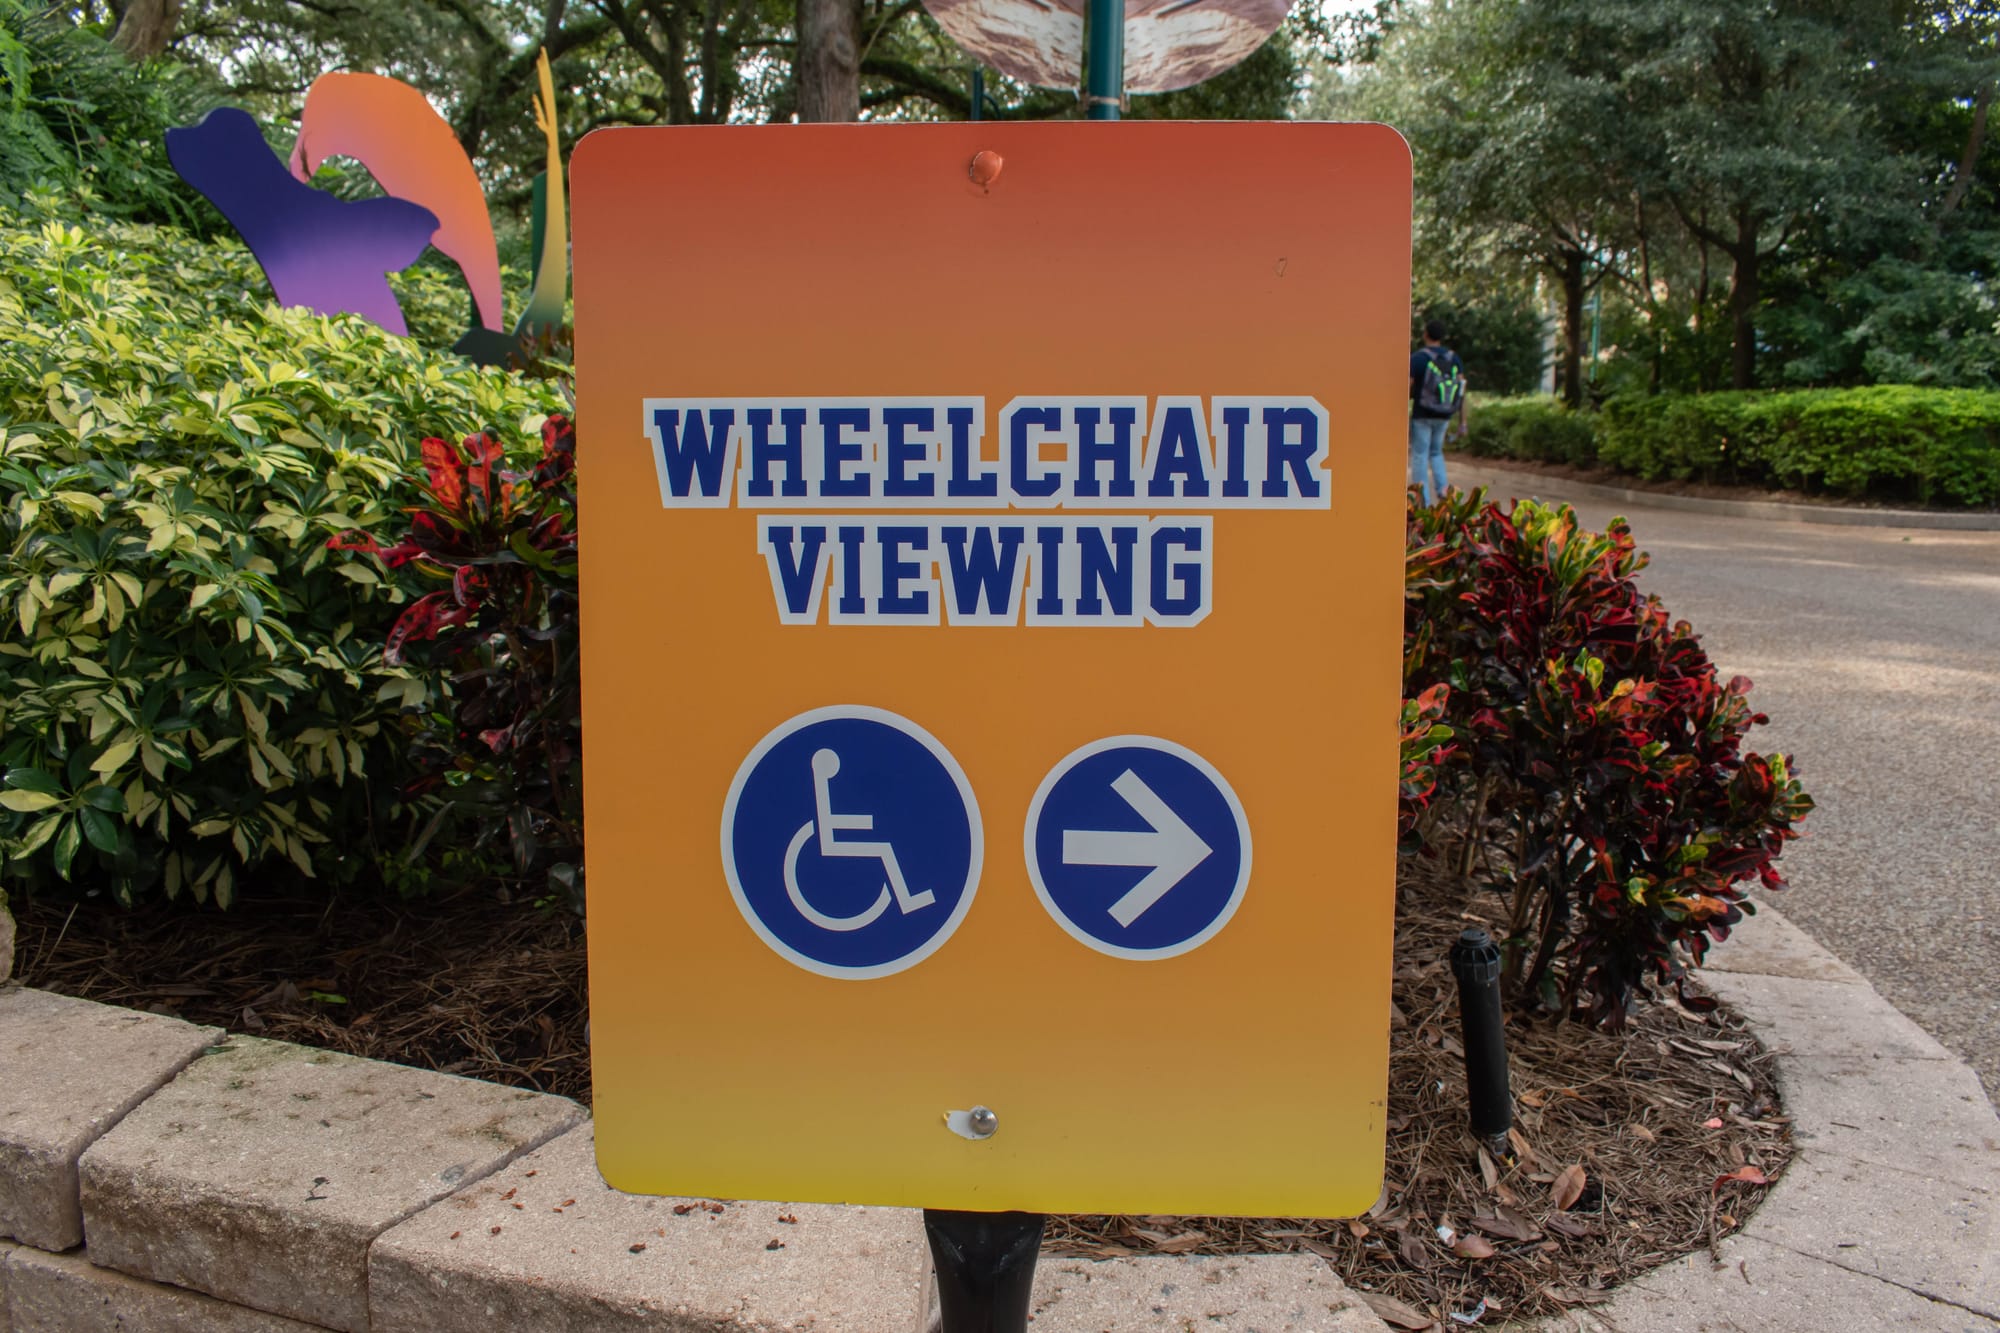 Designated wheelchair viewing areas for shows and parades at Disney World